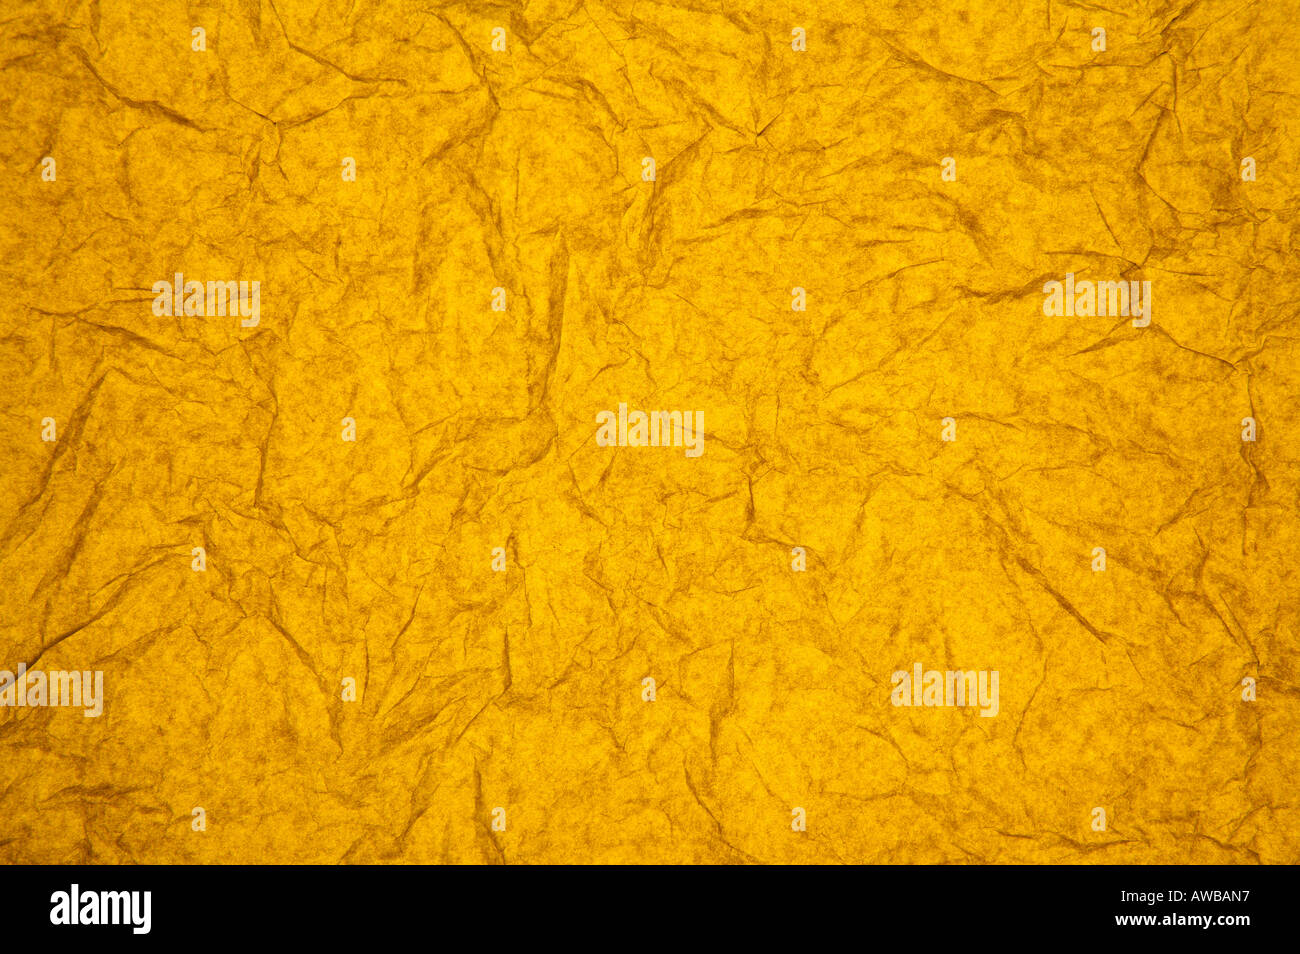 ABSTRACT RANDOM BACKGROUND OF CREASED CRUMPLED ORANGE TISSUE PAPER Stock Photo